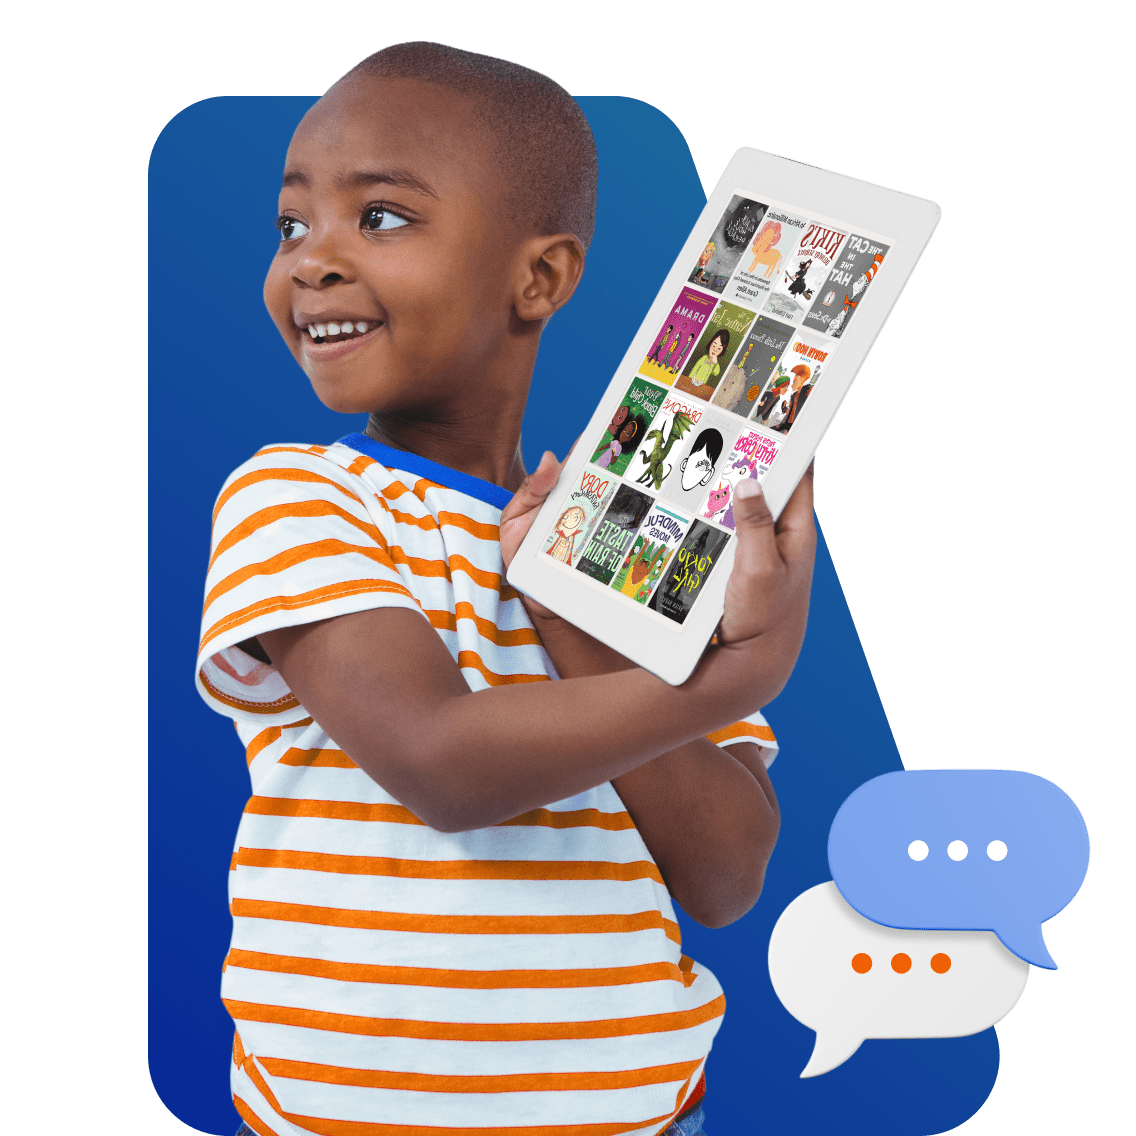 Texas Online Schools image 5 (name FIRST IMAGE 1 Young Boy Tablet Social)